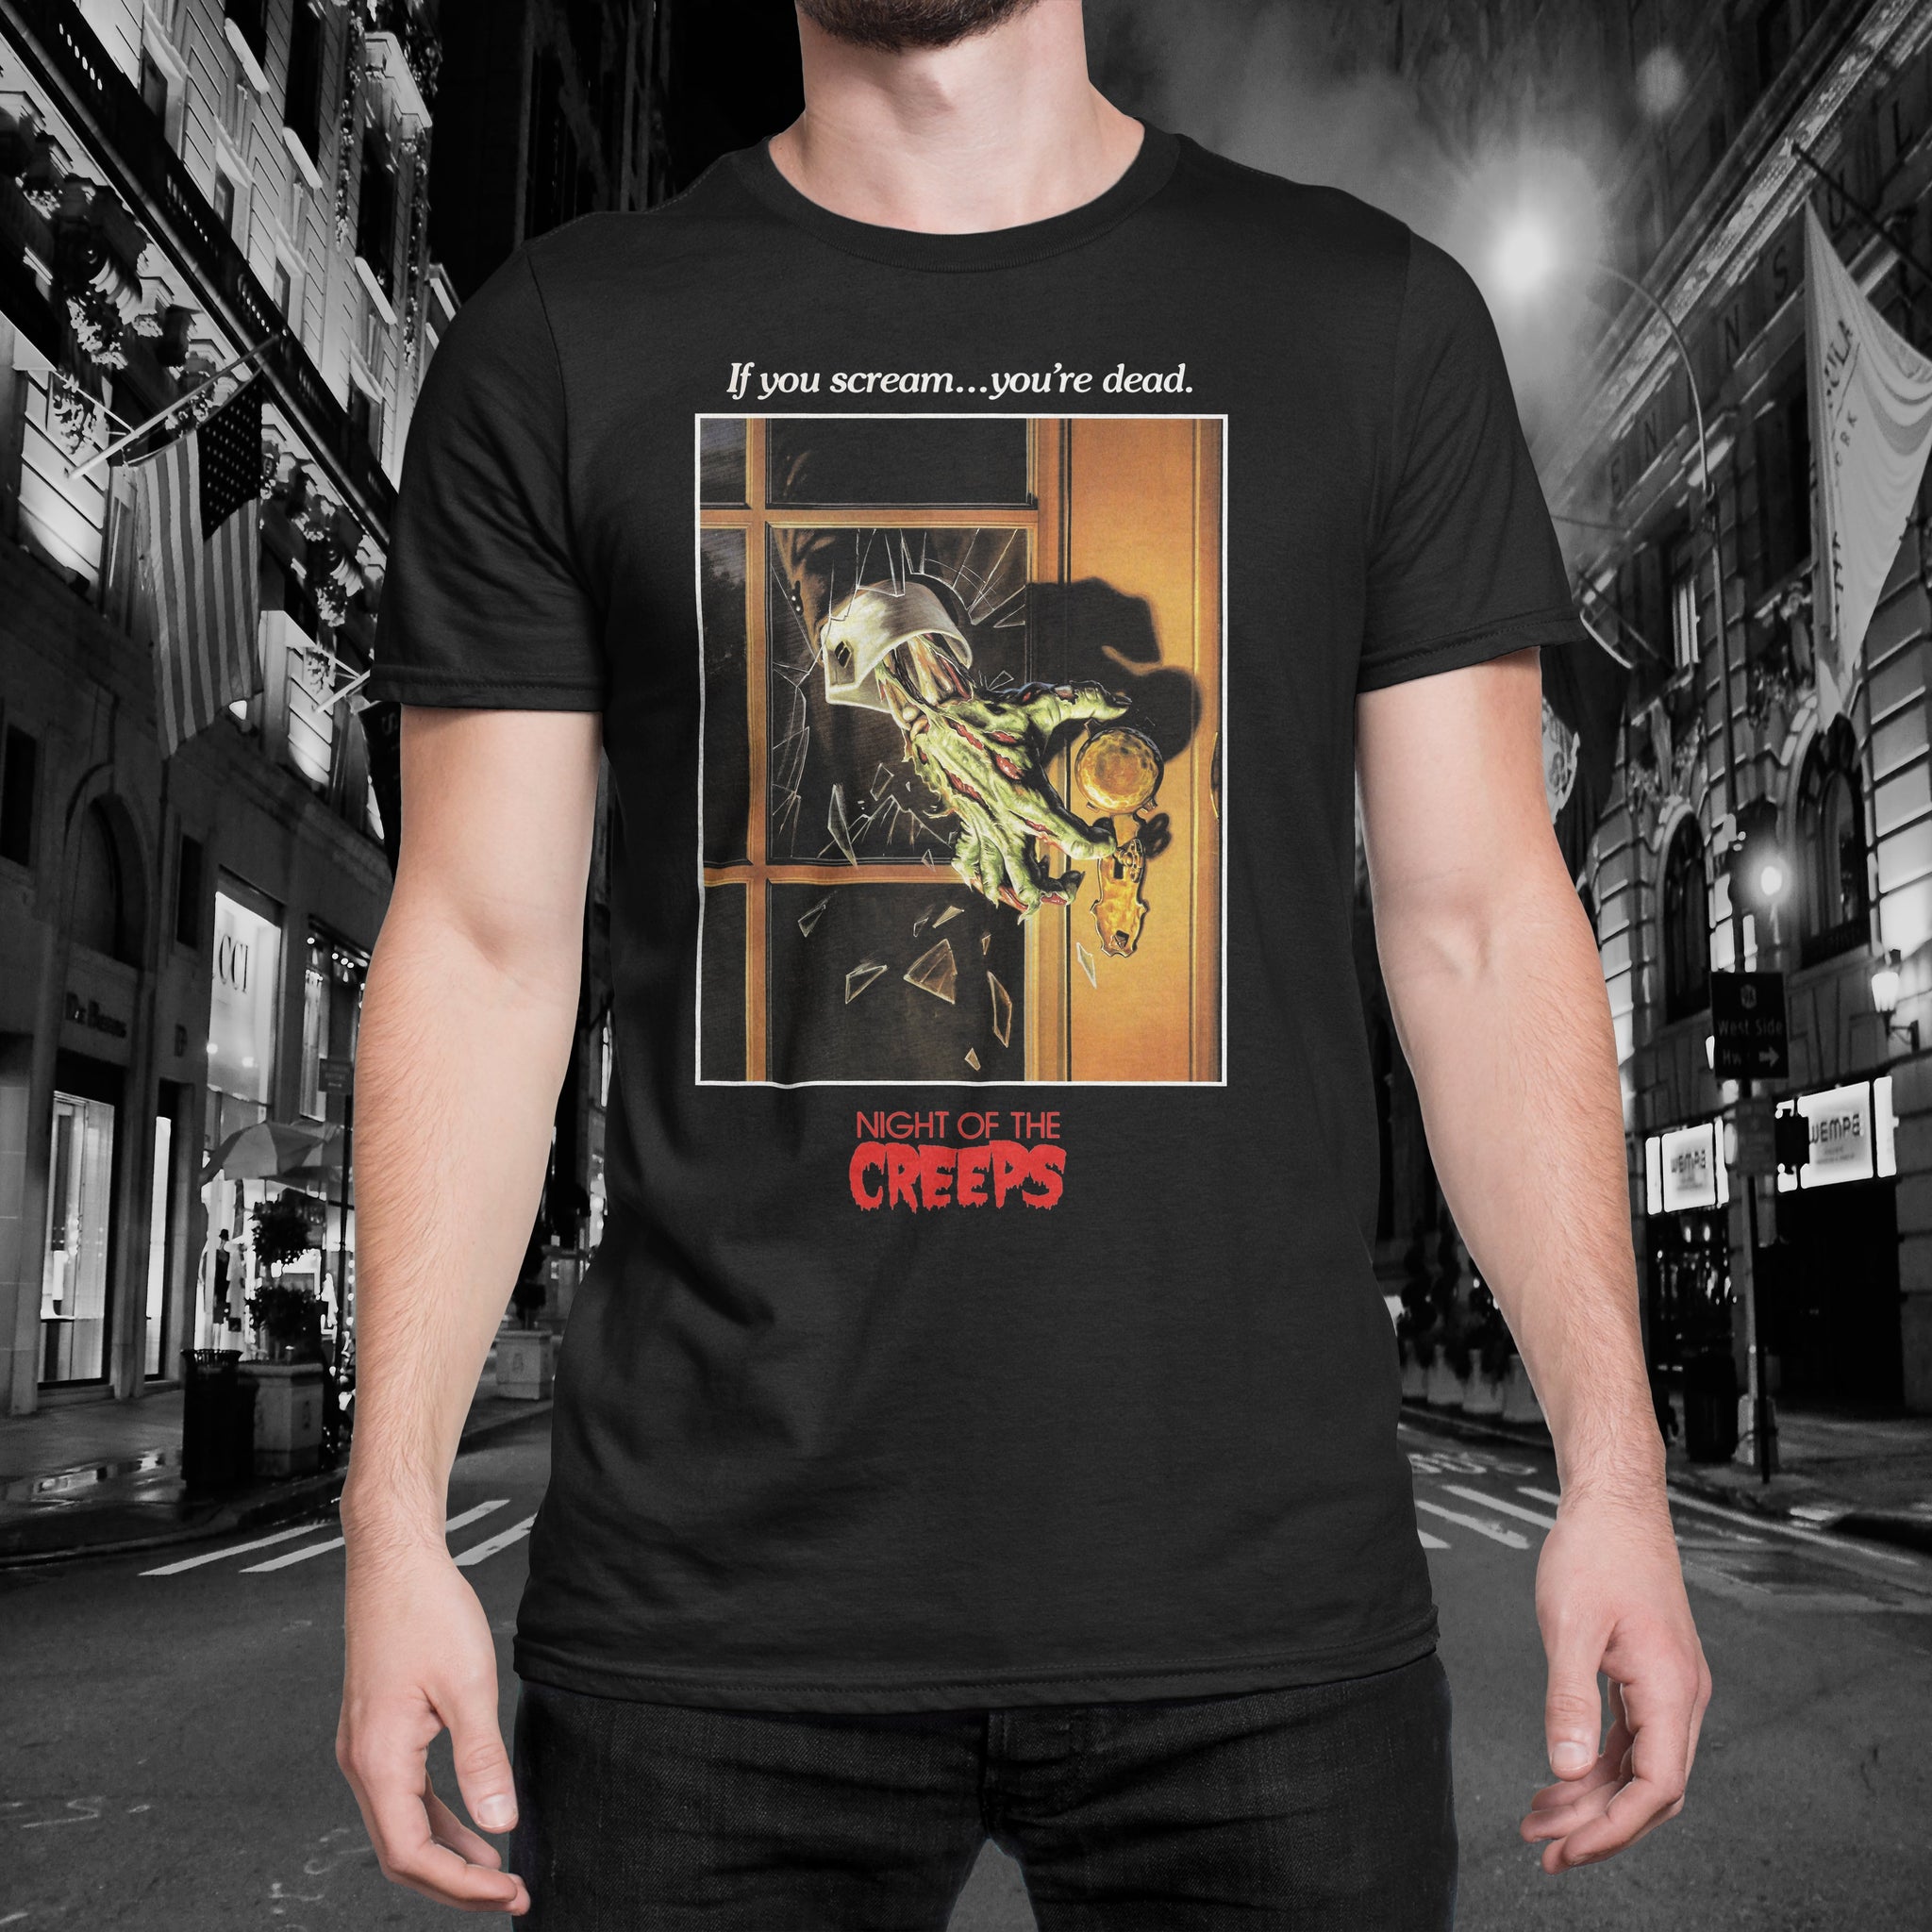 Night of the Creeps "Scream, You're Dead" Tee